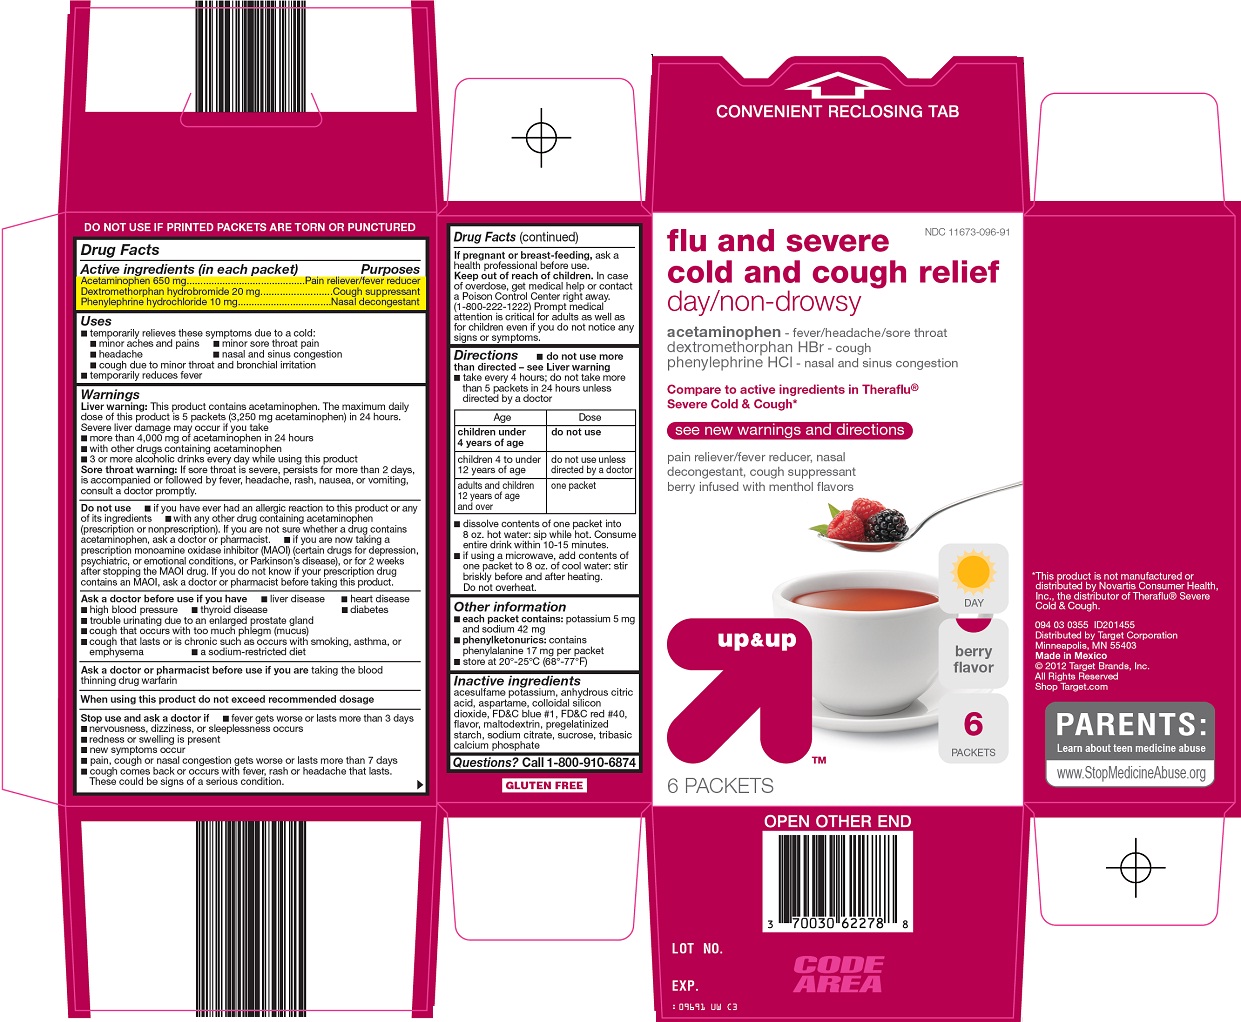 Flu and Severe Cold and Cough Relief Carton Image